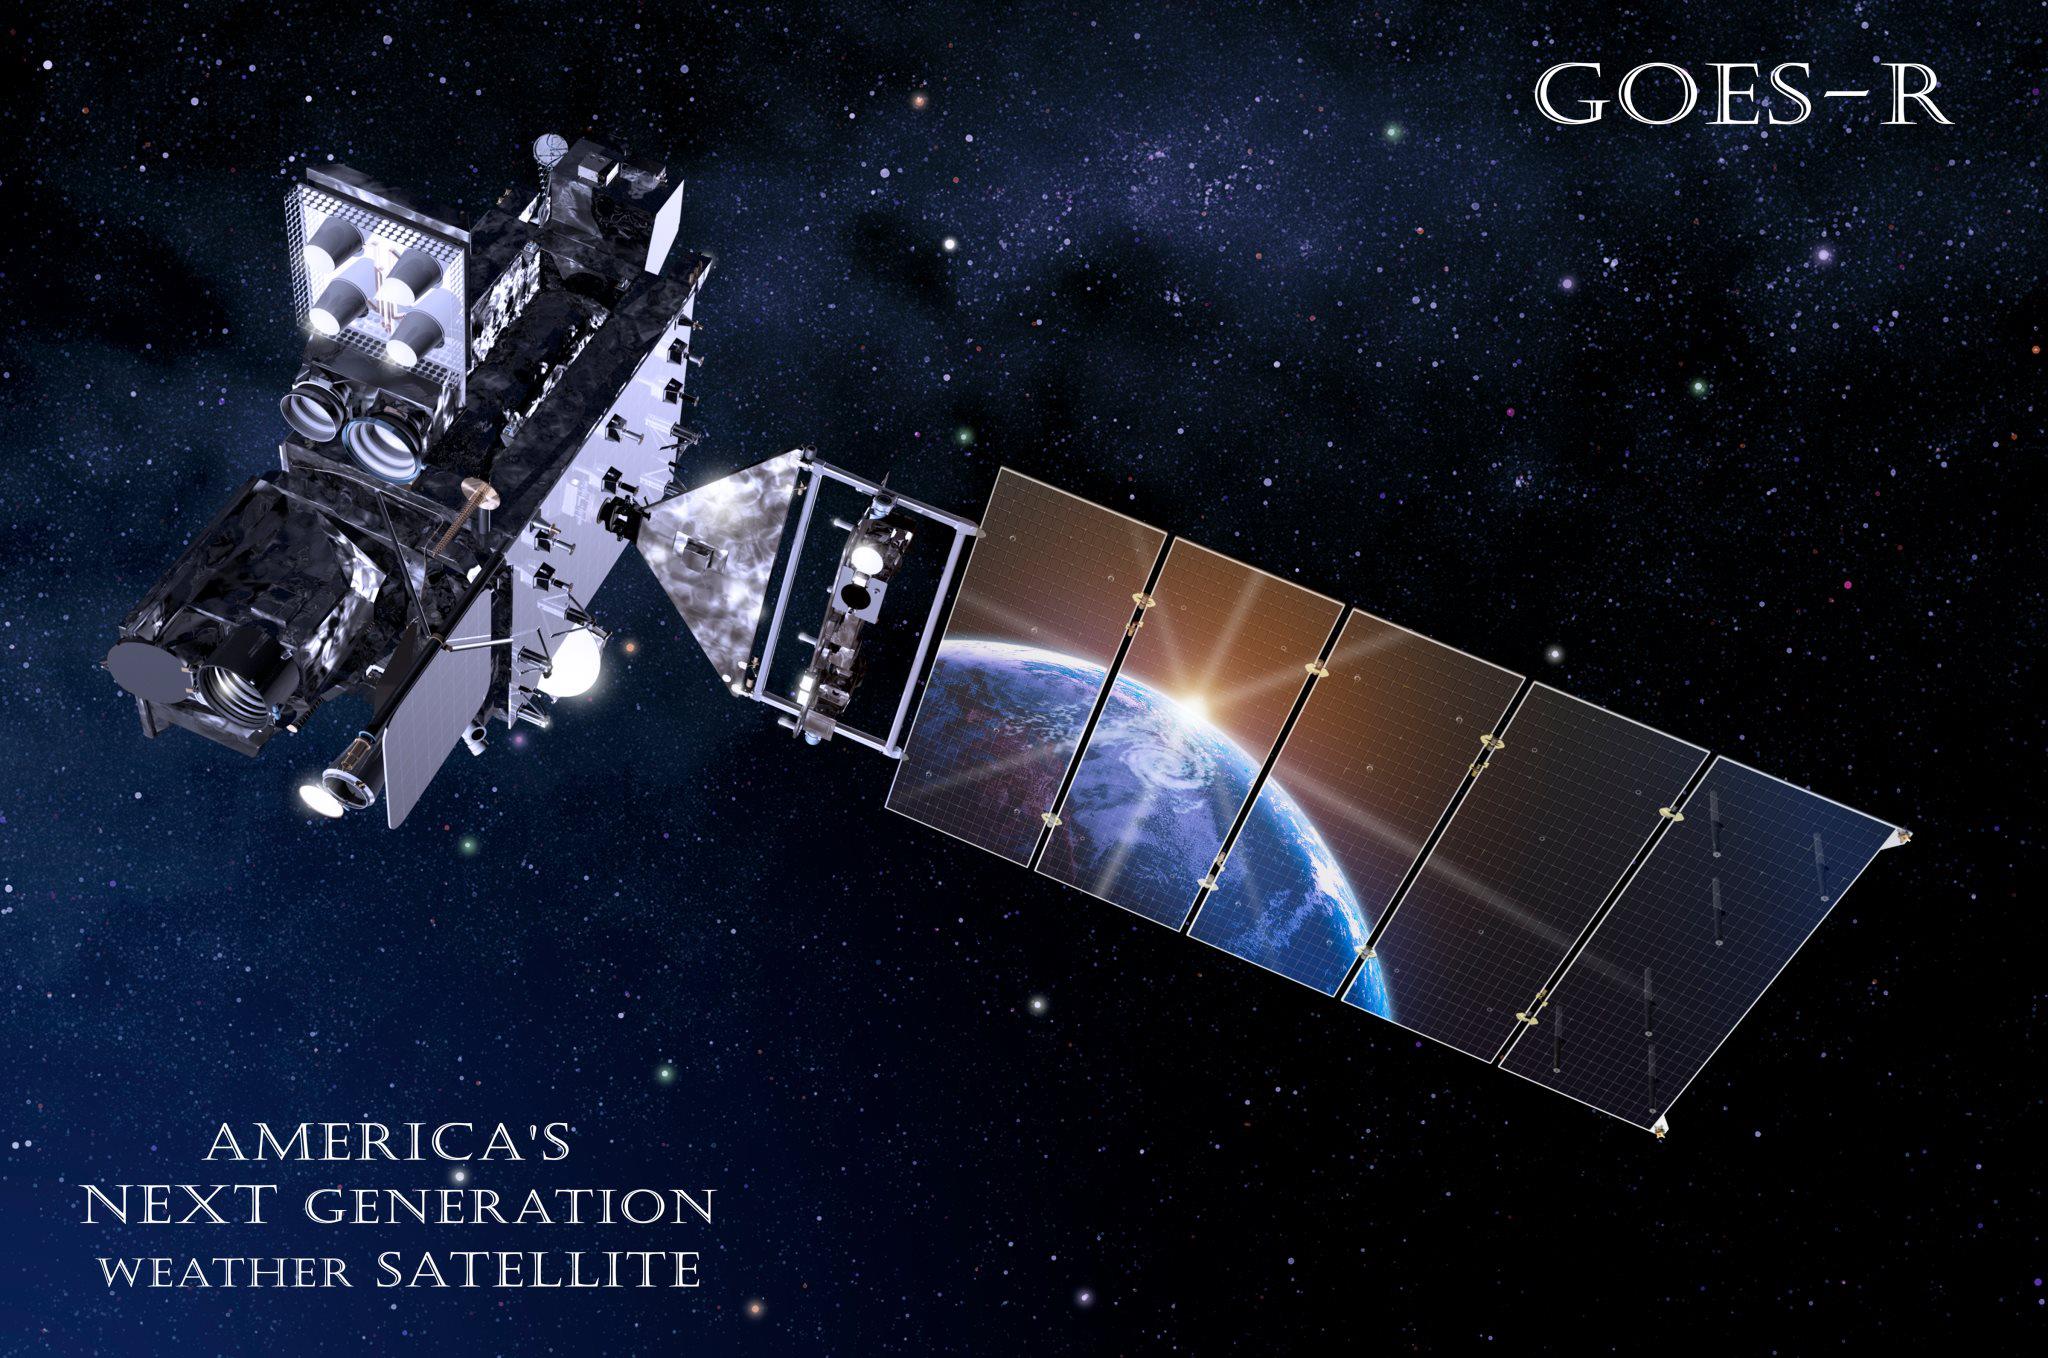 Artists concept for  NASA/NOAA GOES-R (Geostationary Operational Environmental Satellite - R Series) advanced weather satellite in Earth orbit. Credit: NASA/NOAA